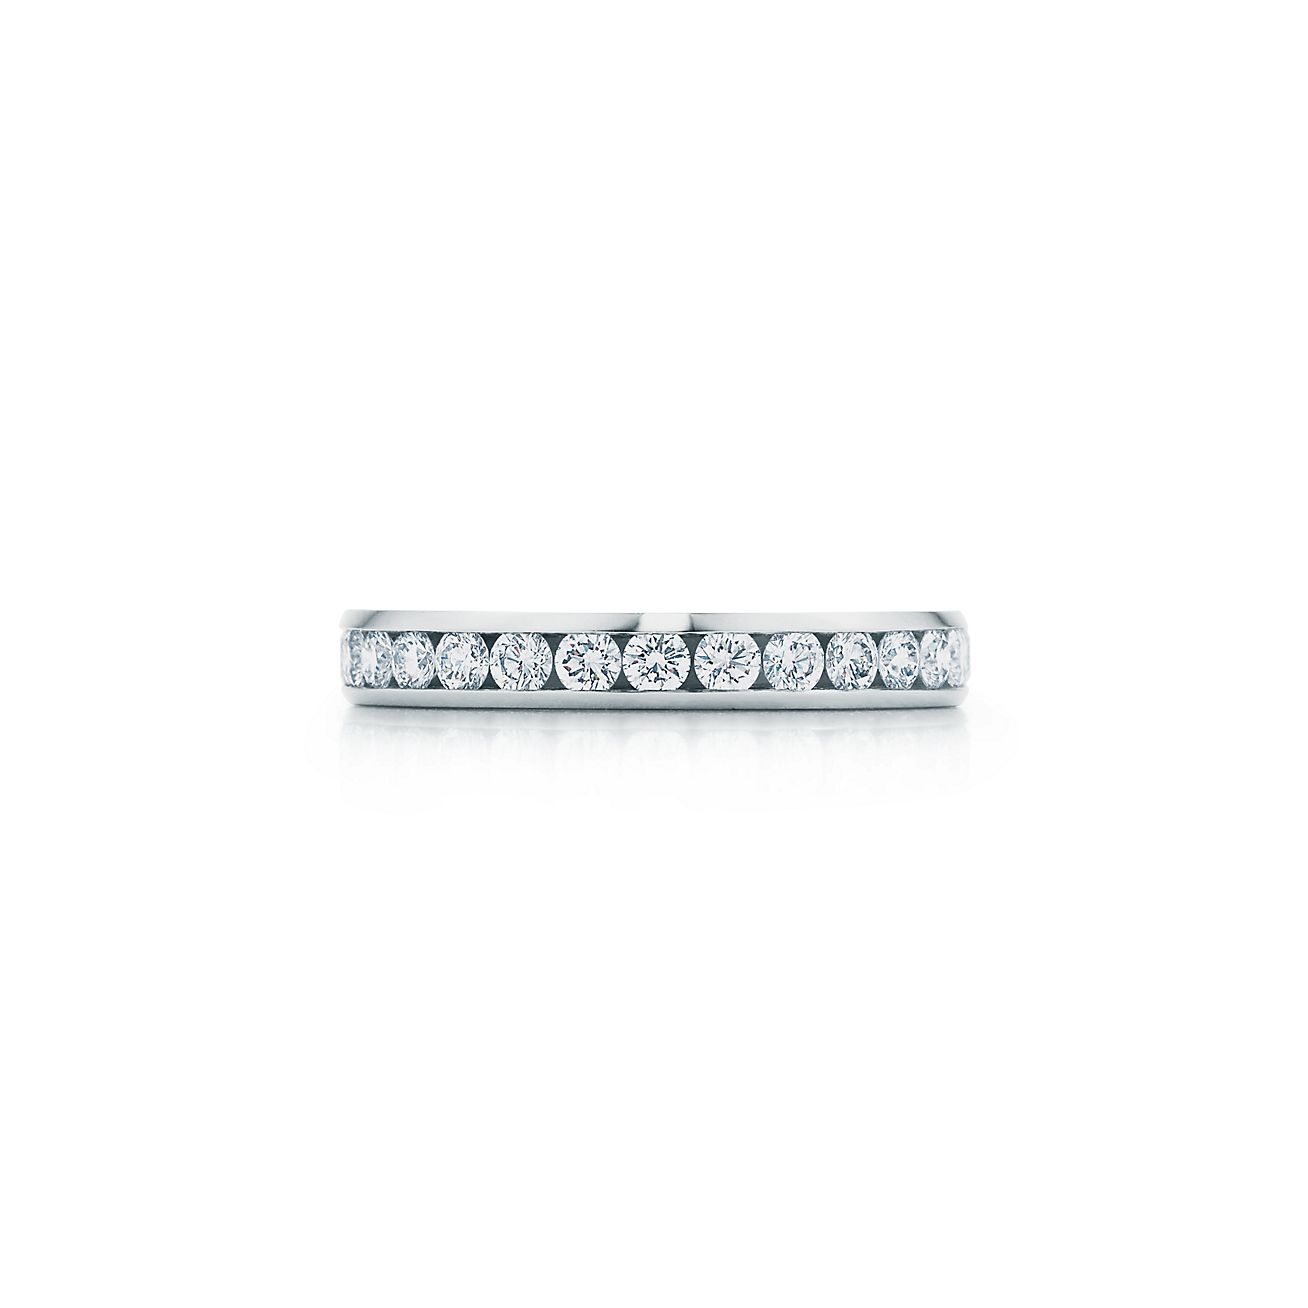 Vintage Tiffany & Co Diamond Platinum Solitaire Engagement Ring | Exquisite  Jewelry for Every Occasion | FWCJ